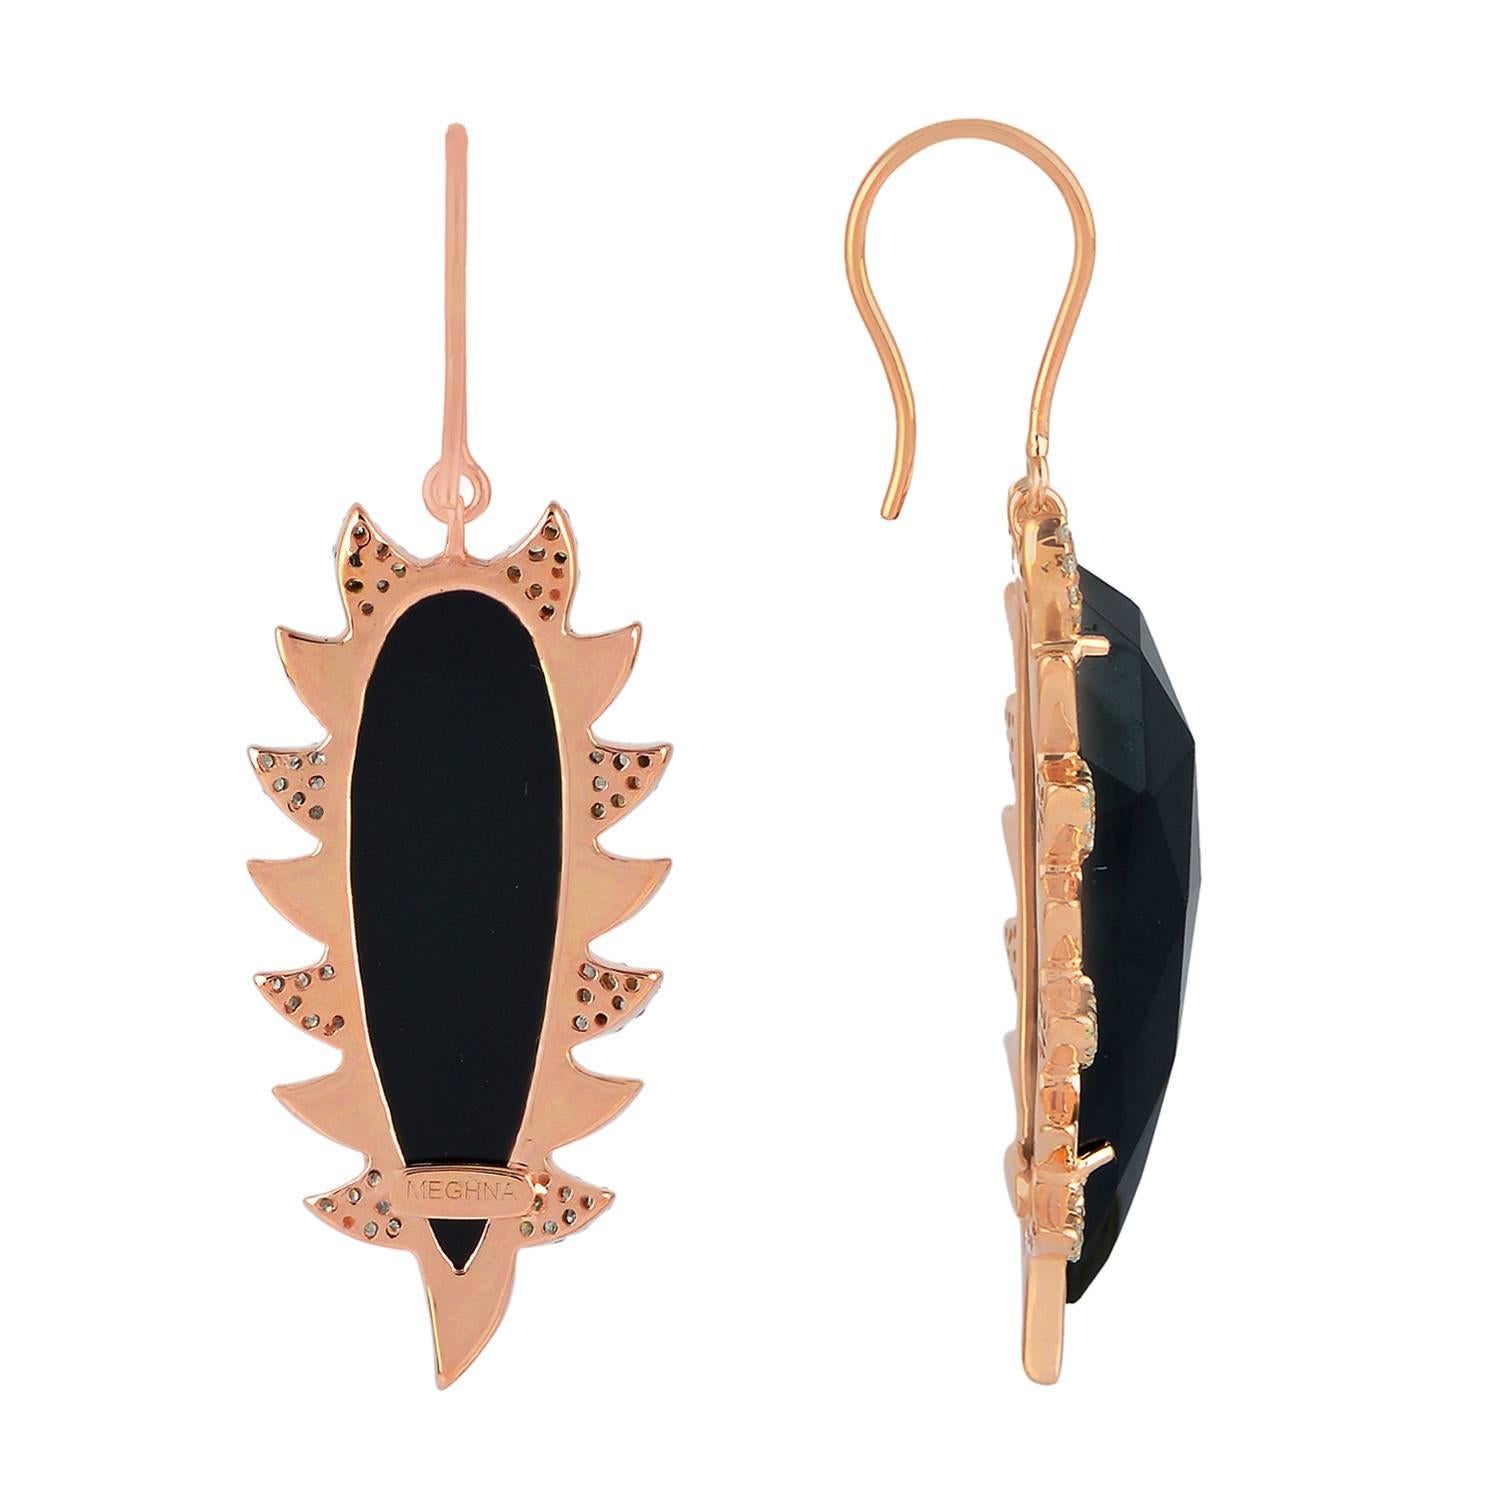 These modern, edgy and fiercely gorgeous drop earrings are handcrafted in 18K gold, sterling silver, 24.84 carat black onyx and .68 carat of sparkling diamonds. Exquisitely framed in signature 